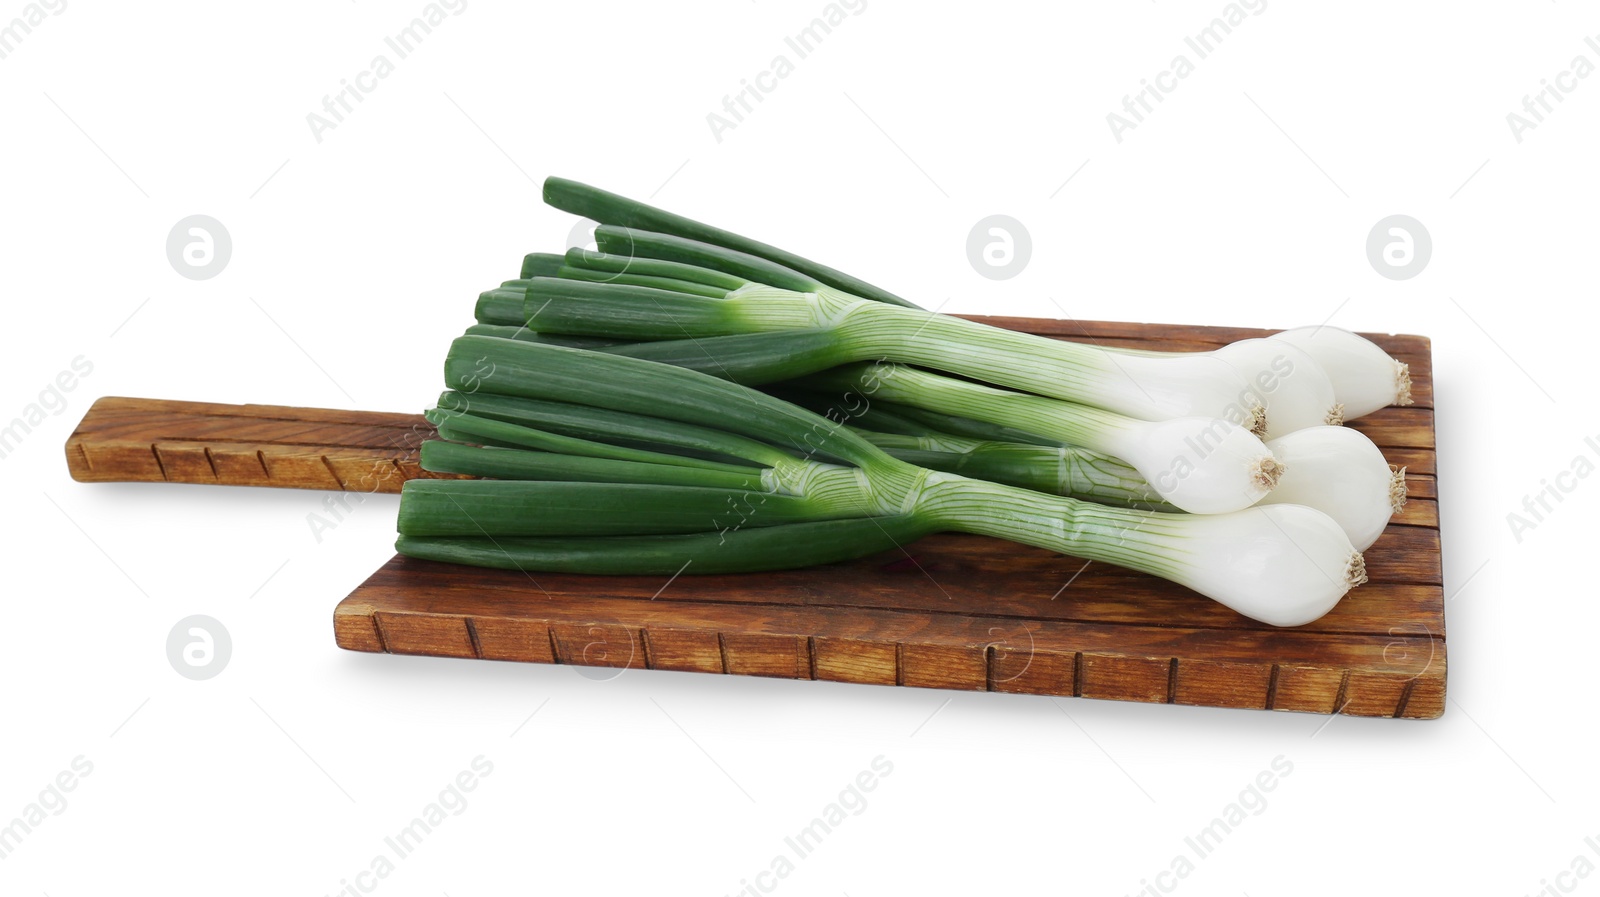 Photo of Whole green spring onions isolated on white